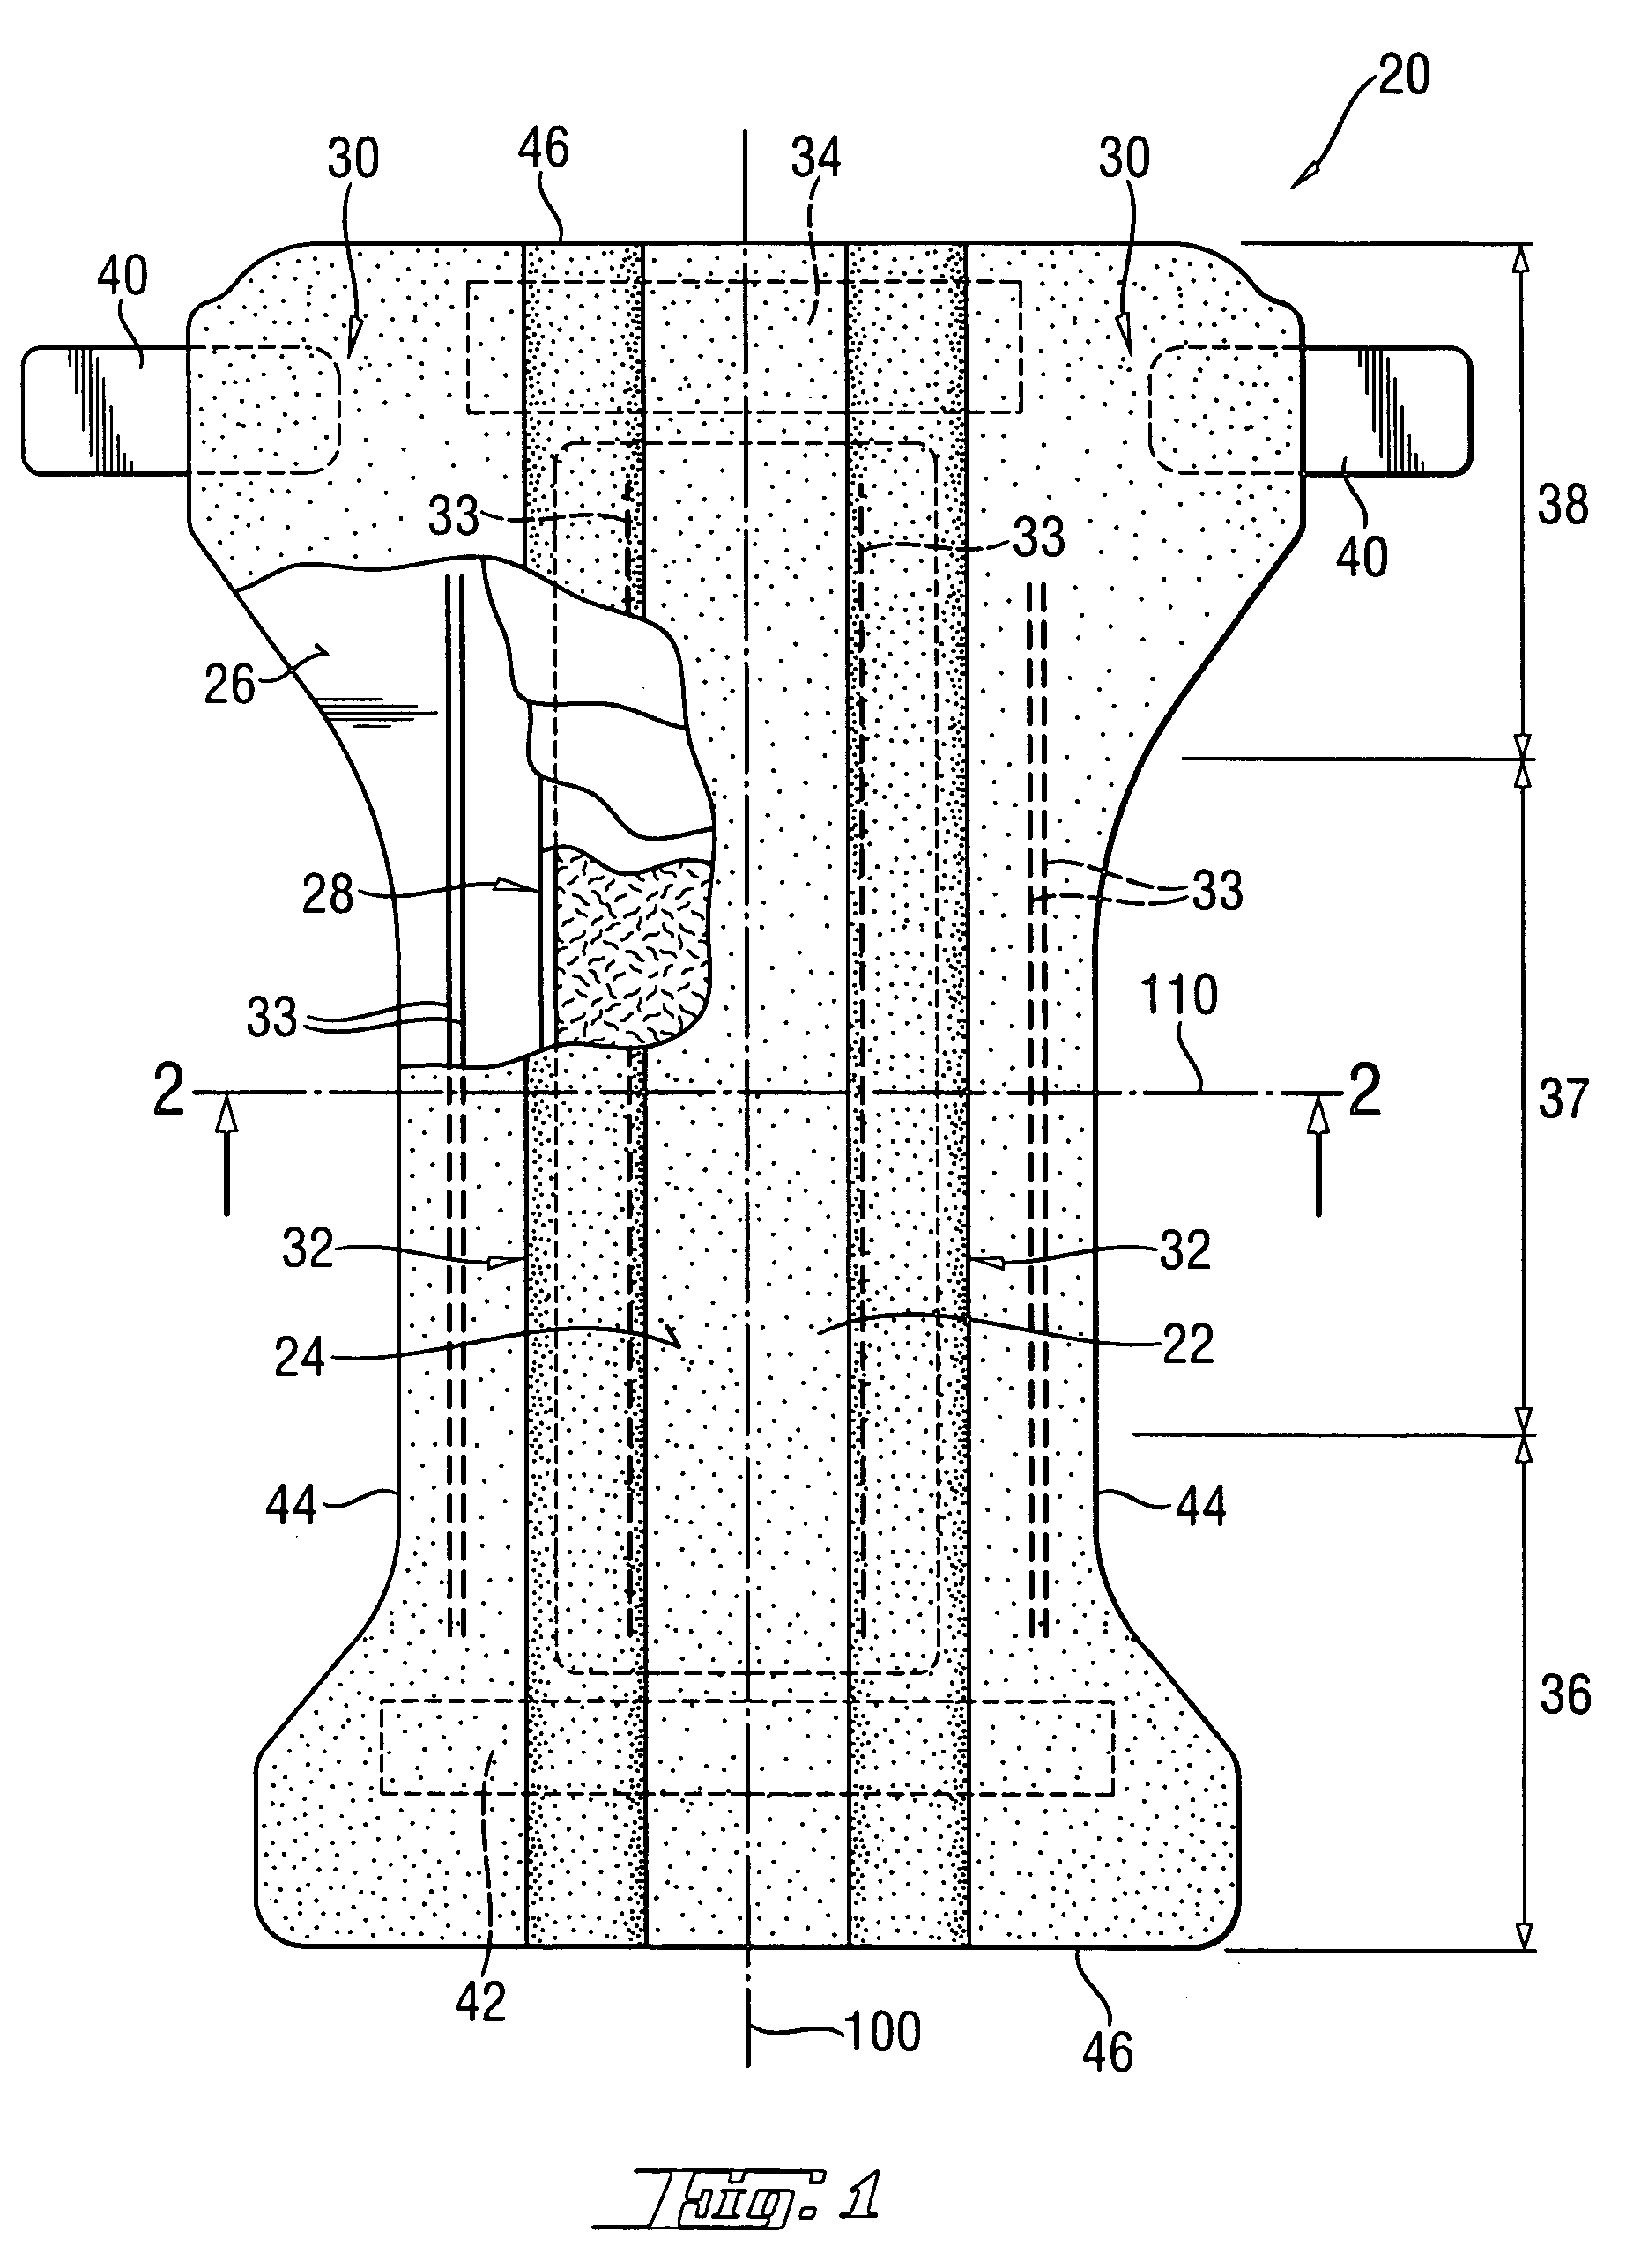 Surface cross-linked superabsorbent polymer particles and methods of making them